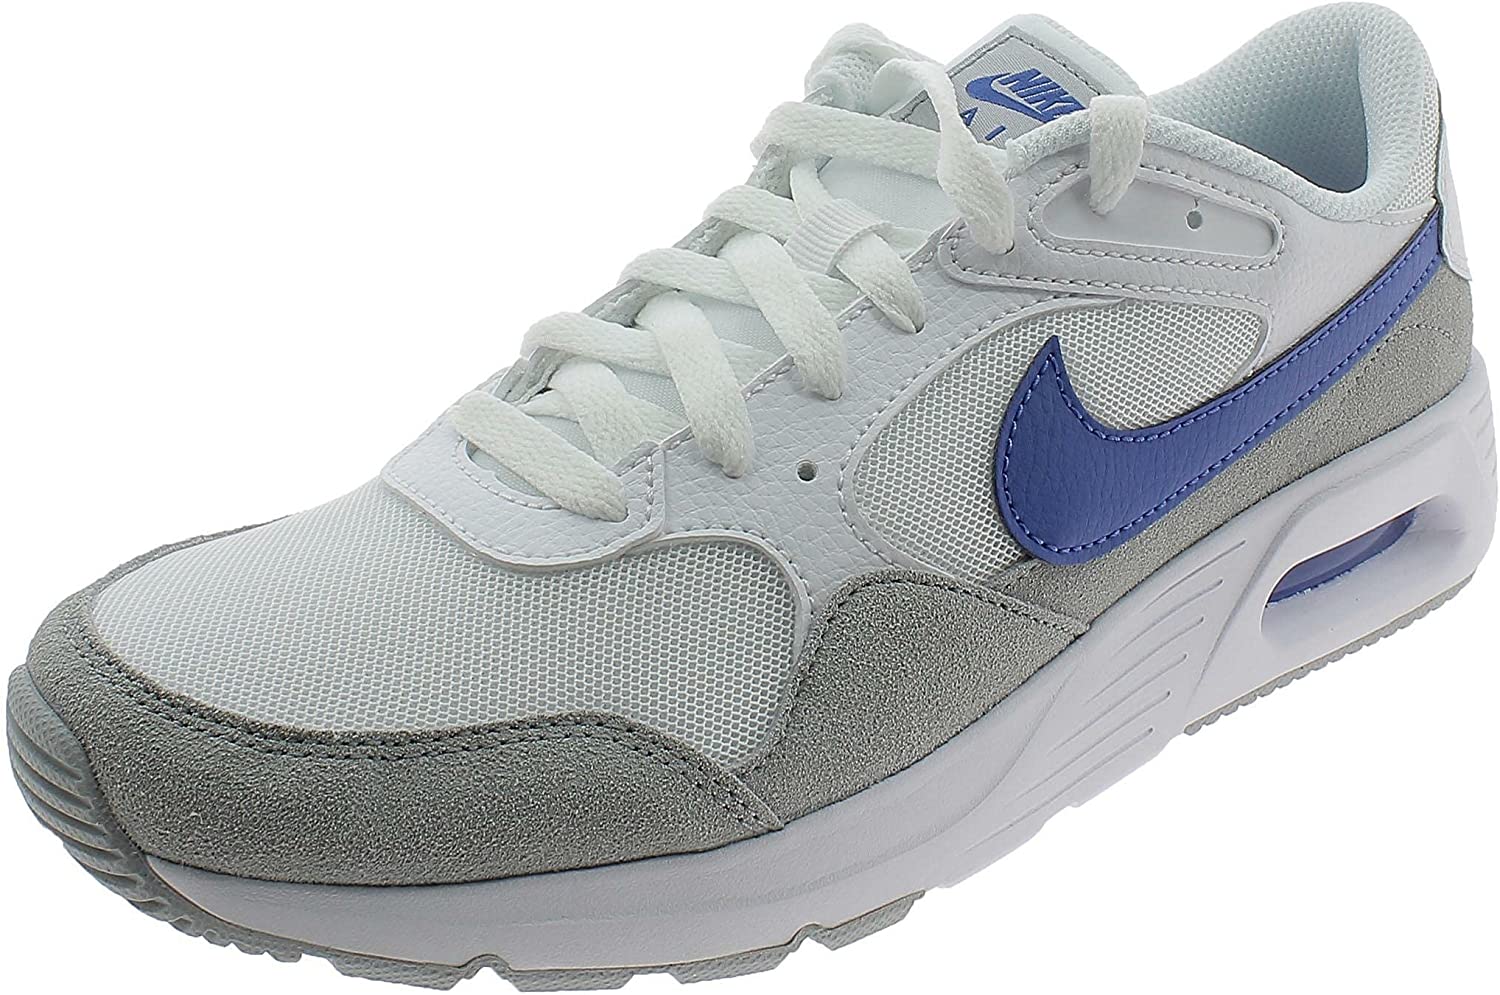 Sweetsoles – Nike Air Max 1 - White/Harbor Blue  Nike air max, Nike shoes  for sale, Sneakers men fashion